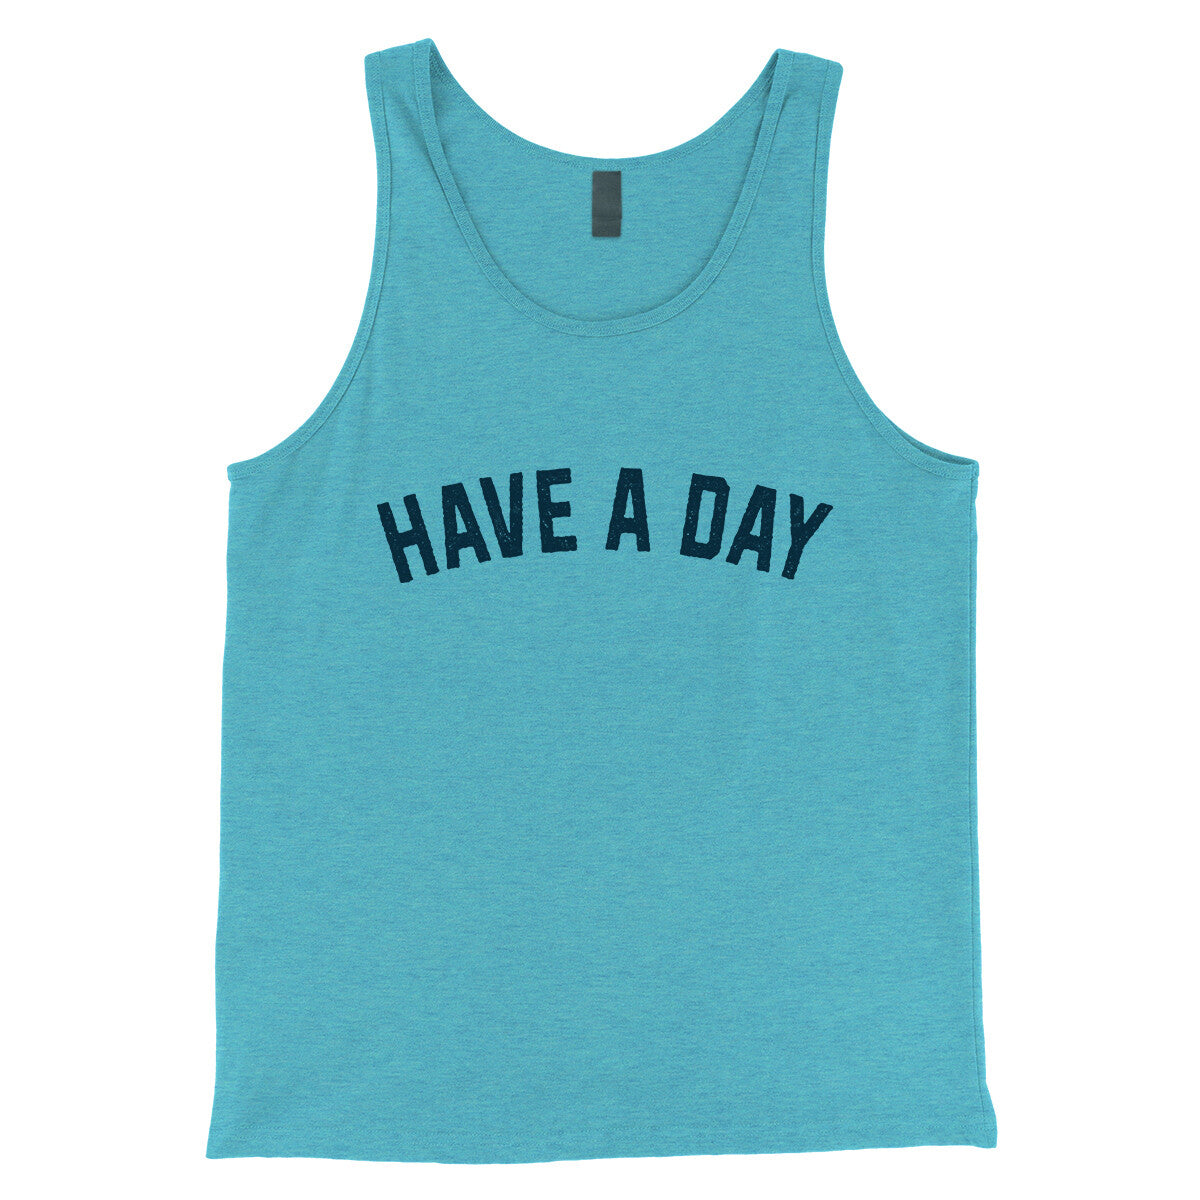 Have a Day in Aqua Triblend Color